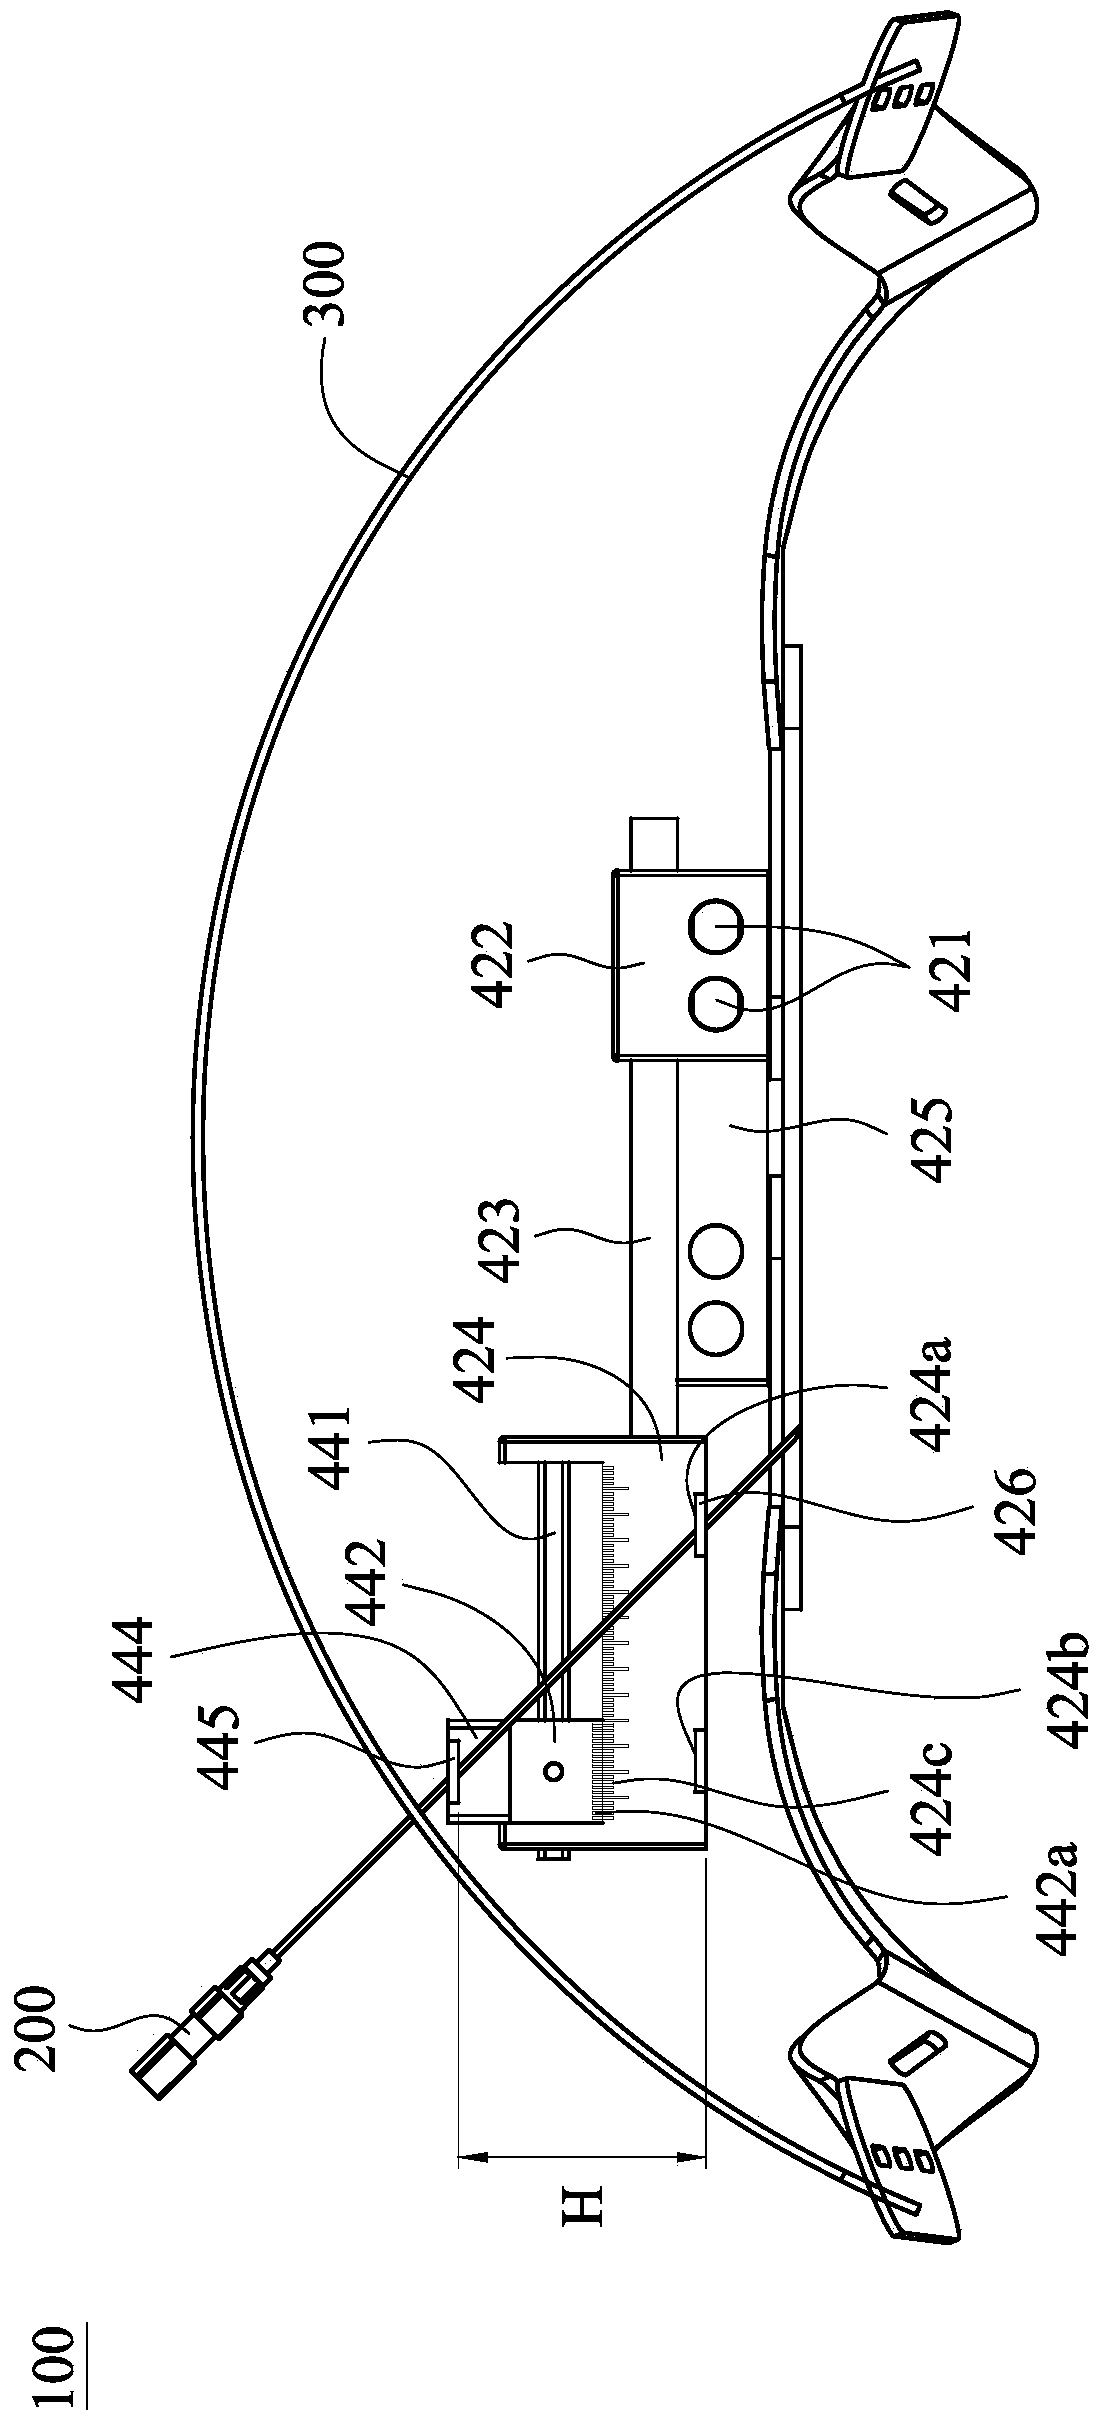 puncture needle positioning device